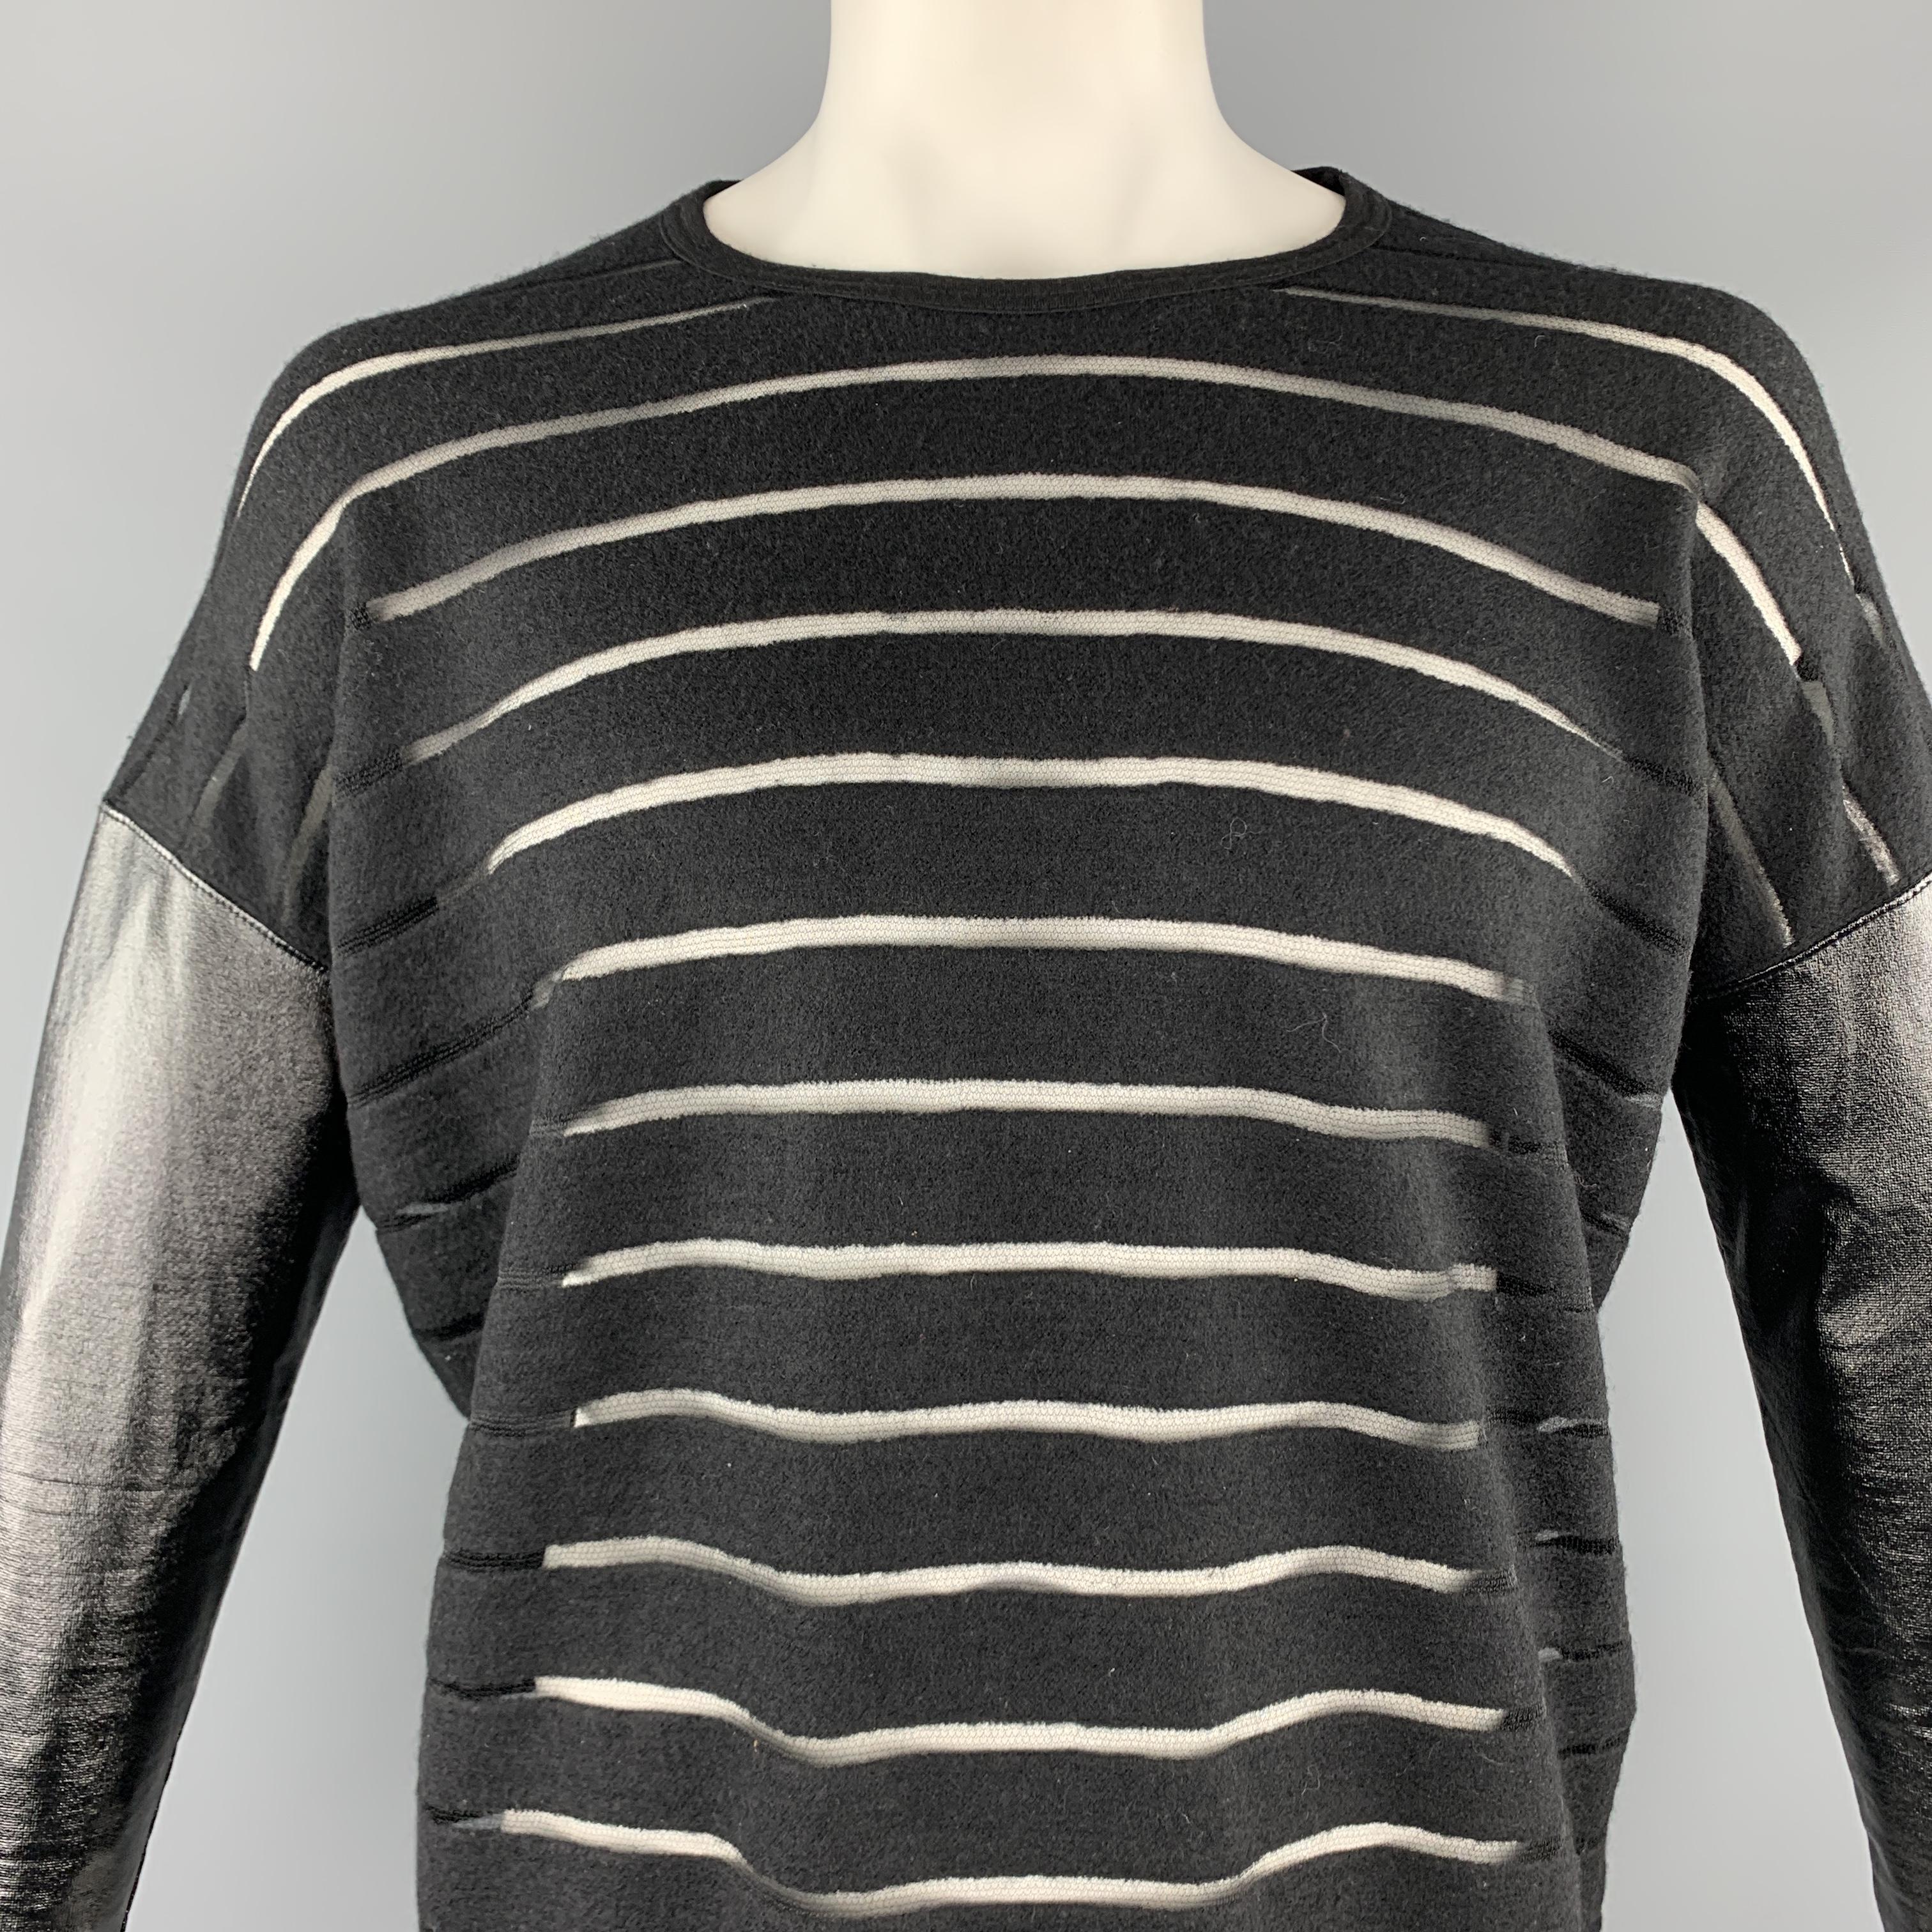 JUNYA WATANABE x COMME des GARCONS pullover comes in a black striped wool blend featuring mixed fabric sleeves, oversized, and a crew-neck. Made in Japan.

Excellent Pre-Owned Condition.
Marked: M

Measurements:

Shoulder: 28.5 in. 
Chest: 56 in.